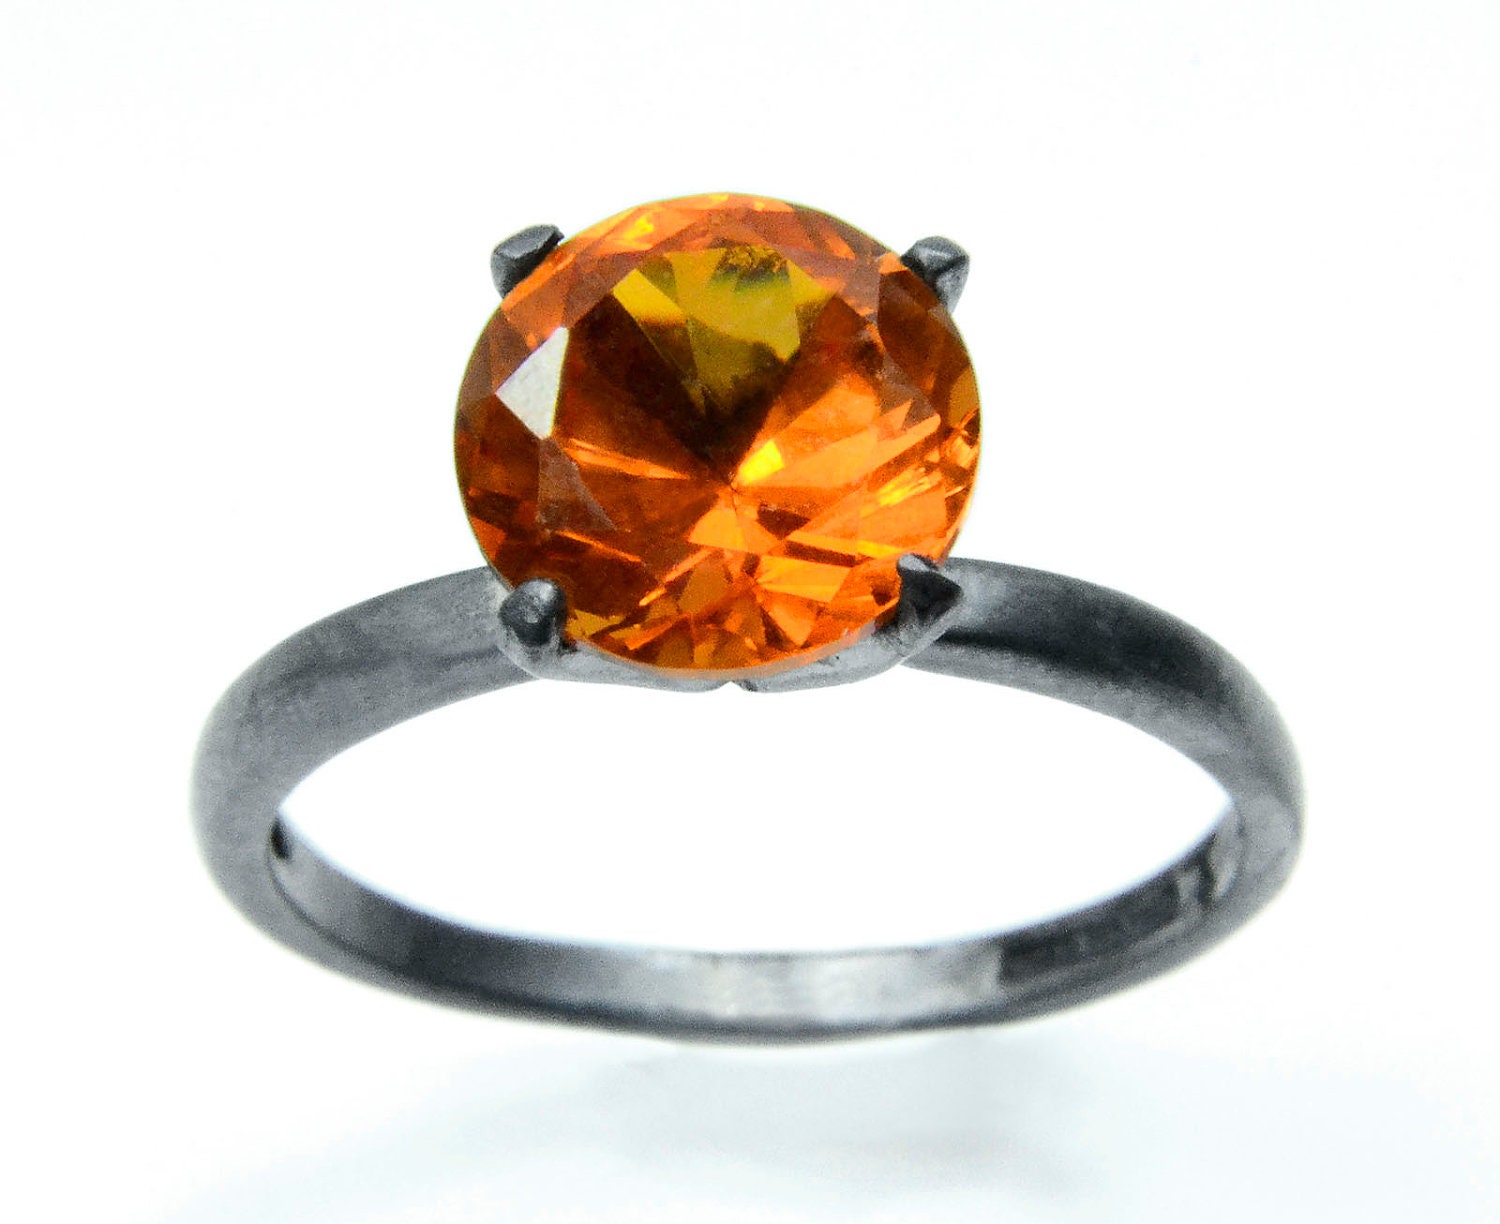 Orange Sapphire Ring in Sterling Silver, Blackened Silver Cocktail Ring with Padparadsha Sapphire - abishessentials